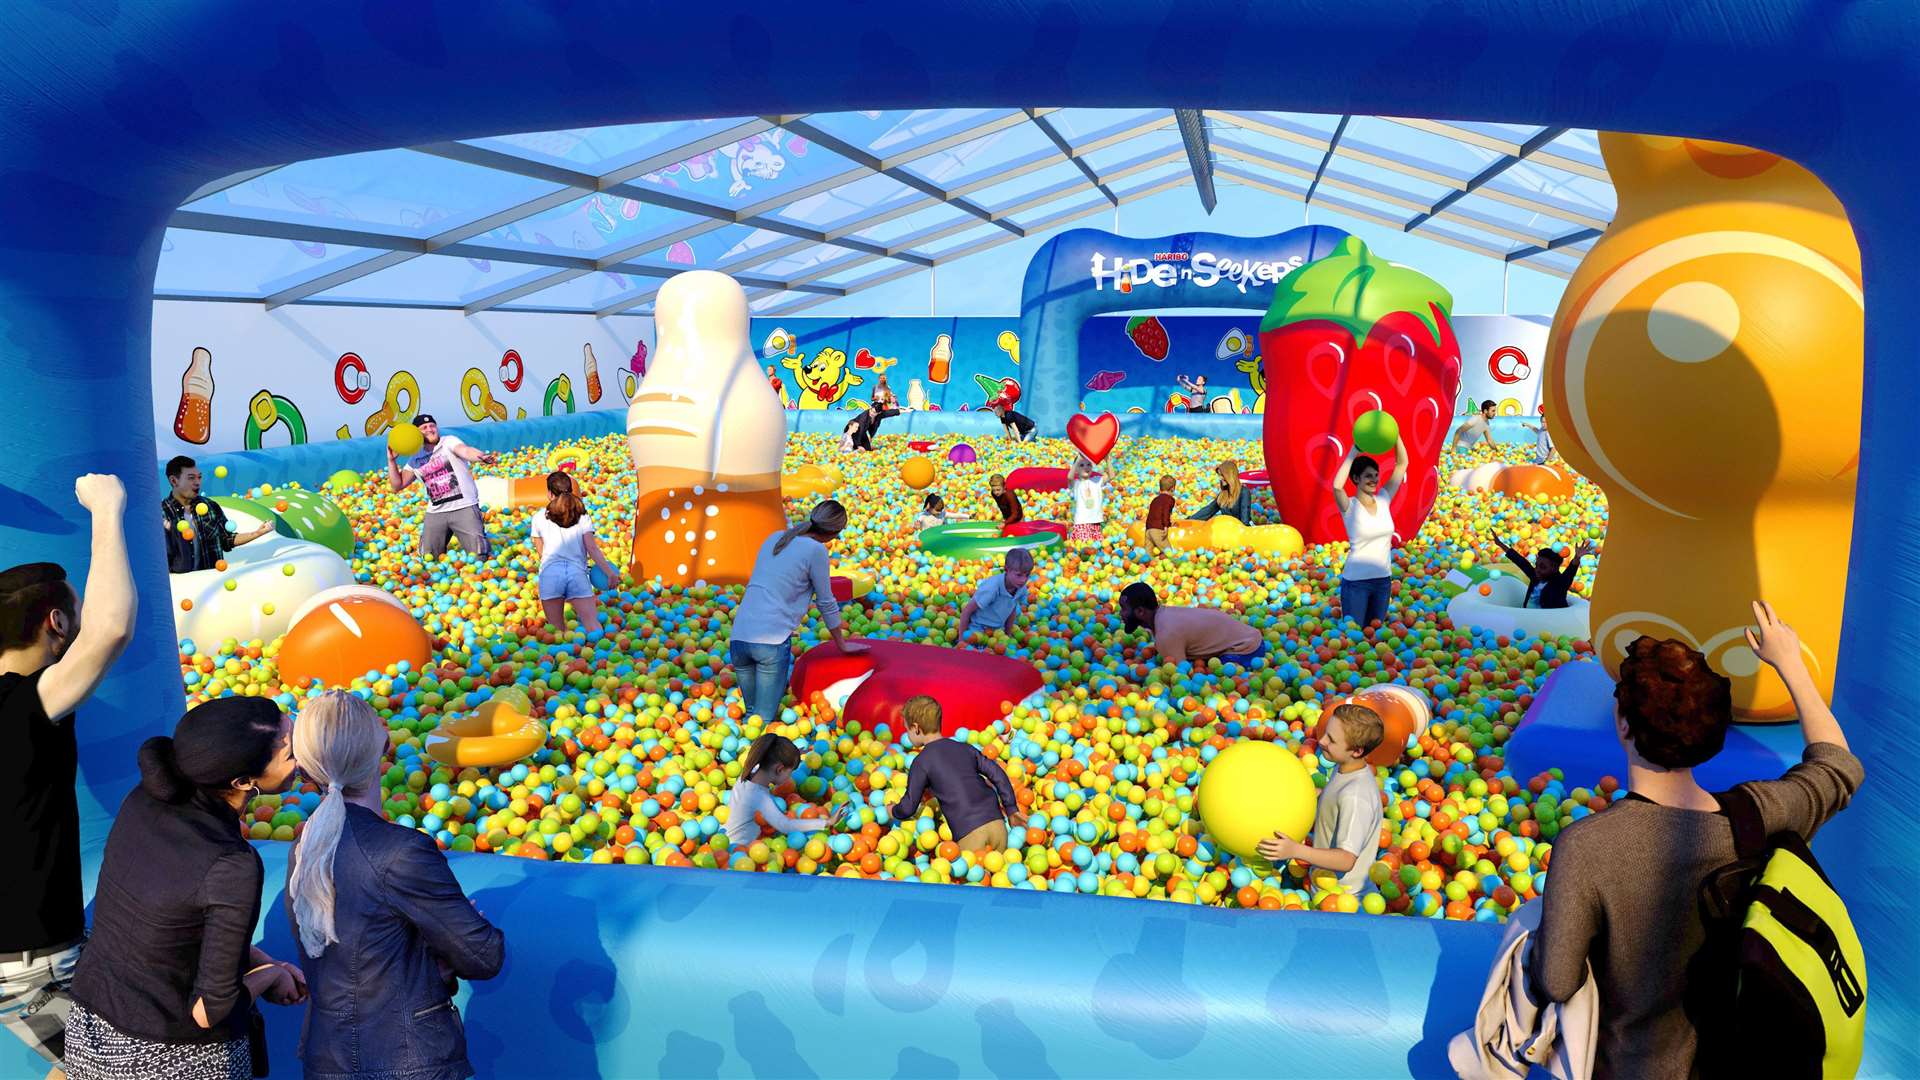 Haribo is bringing the UK’s largest ball pit to Bluewater. Picture: HARIBO